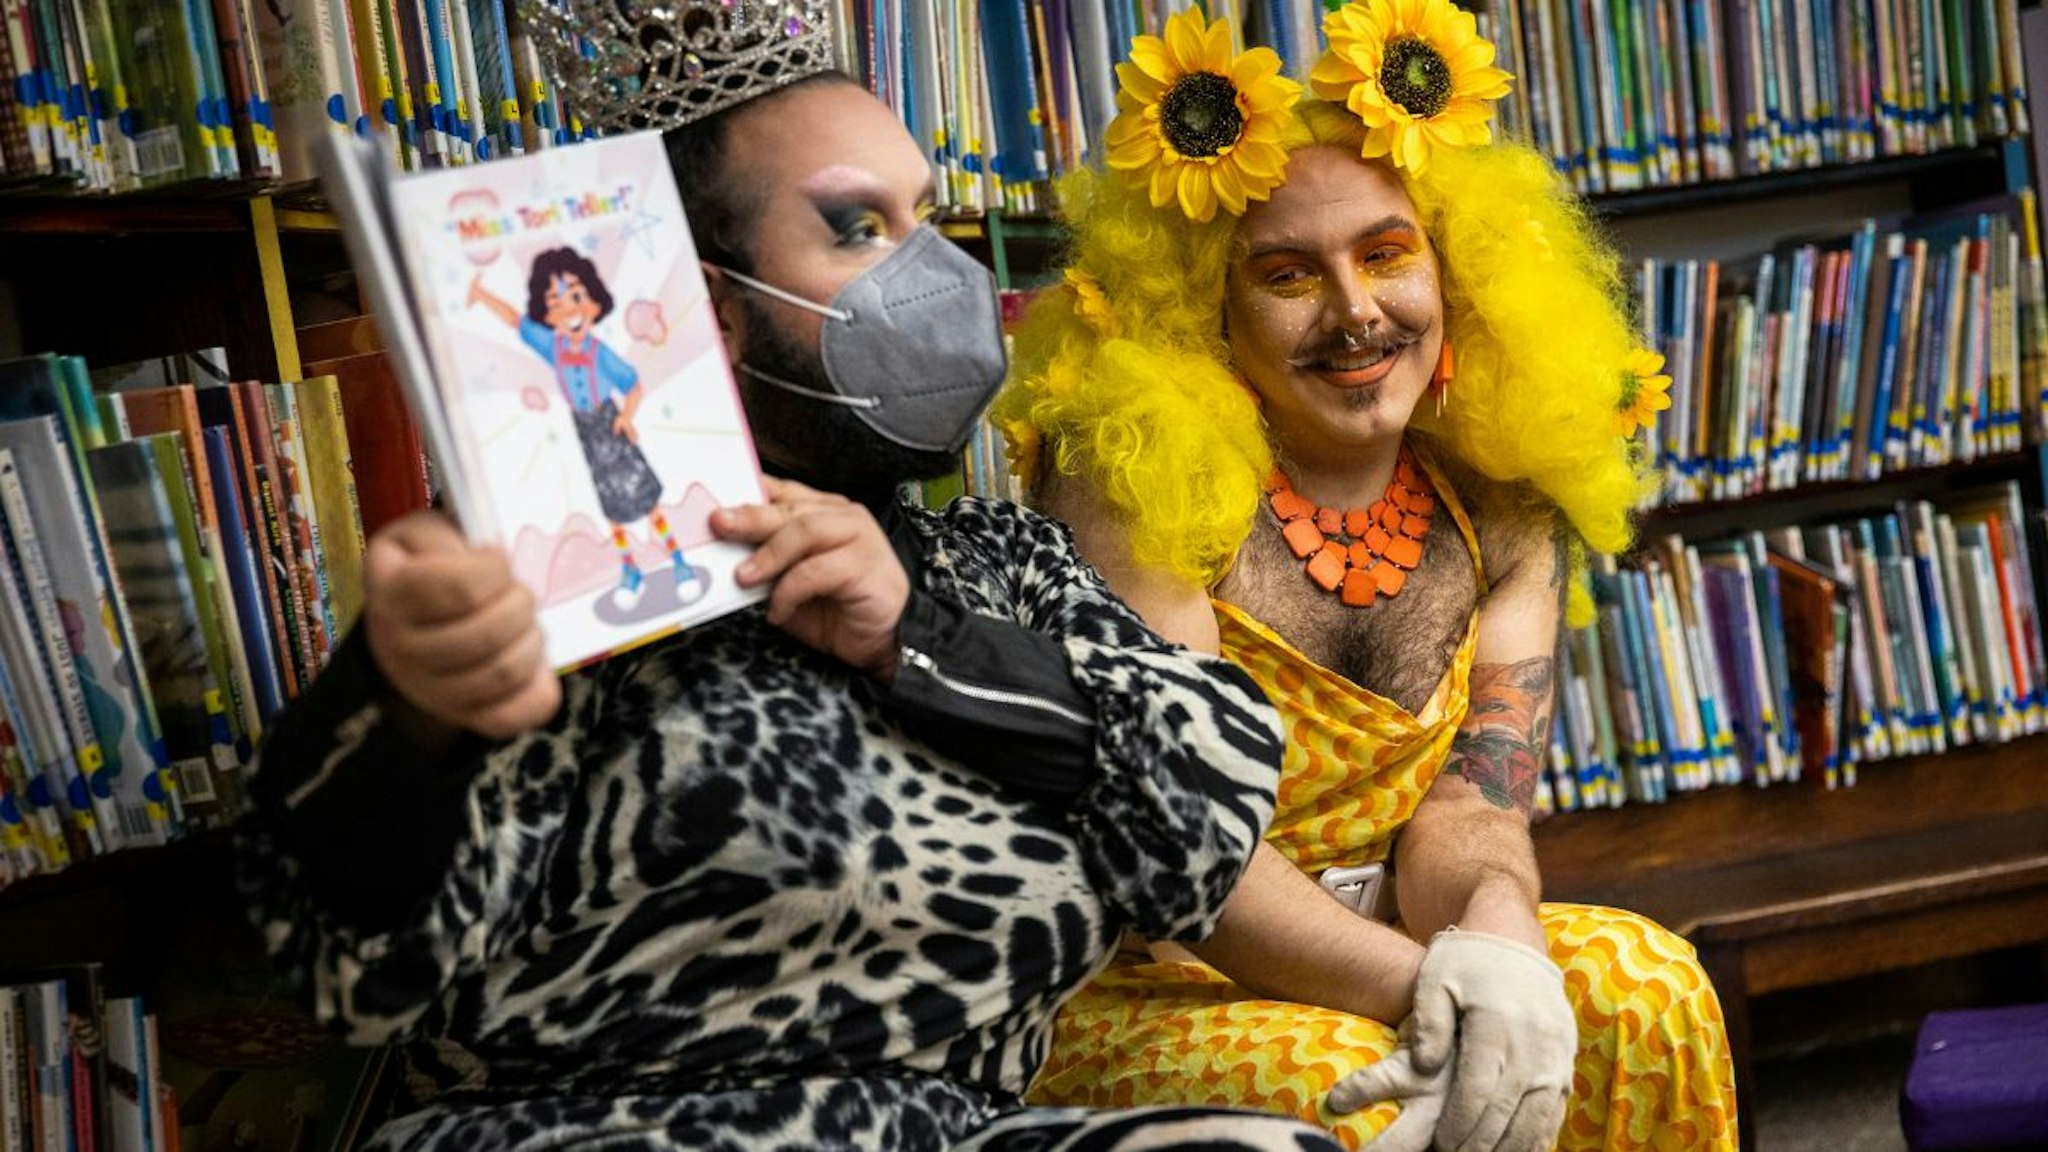 Drag queens Just JP, left, and Sham Payne read stories to children during a Drag Story Hour at Chelsea Public Library in Chelsea, MA on June 25, 2022.